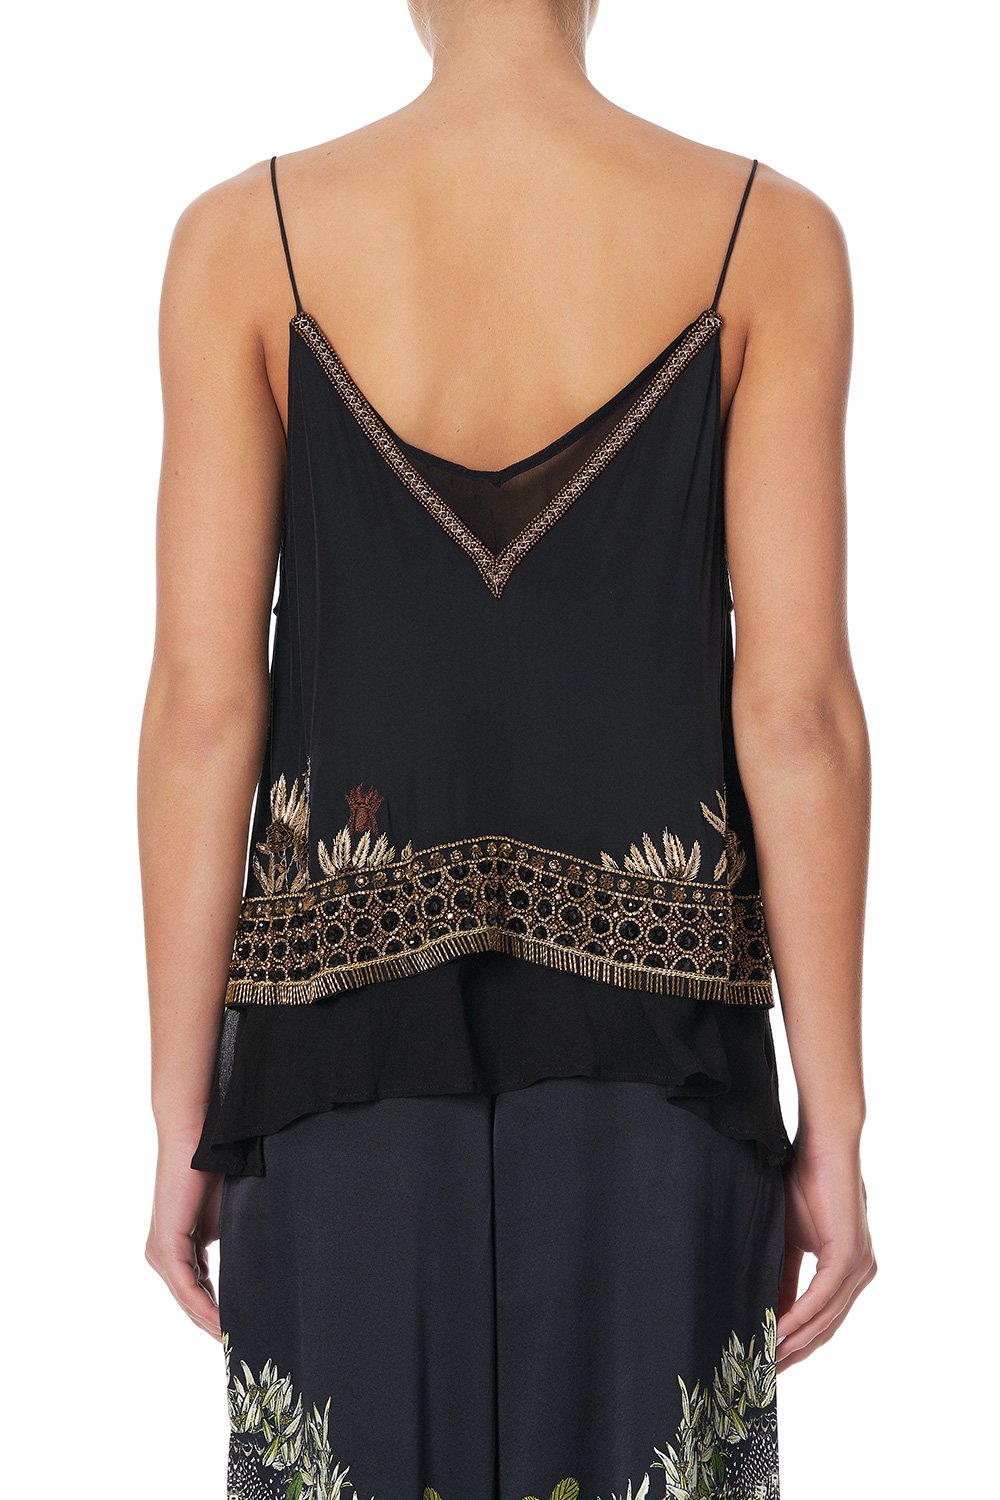 STRAP TOP WITH SHEER UNDERLAY BOTANICAL CHRONICLES